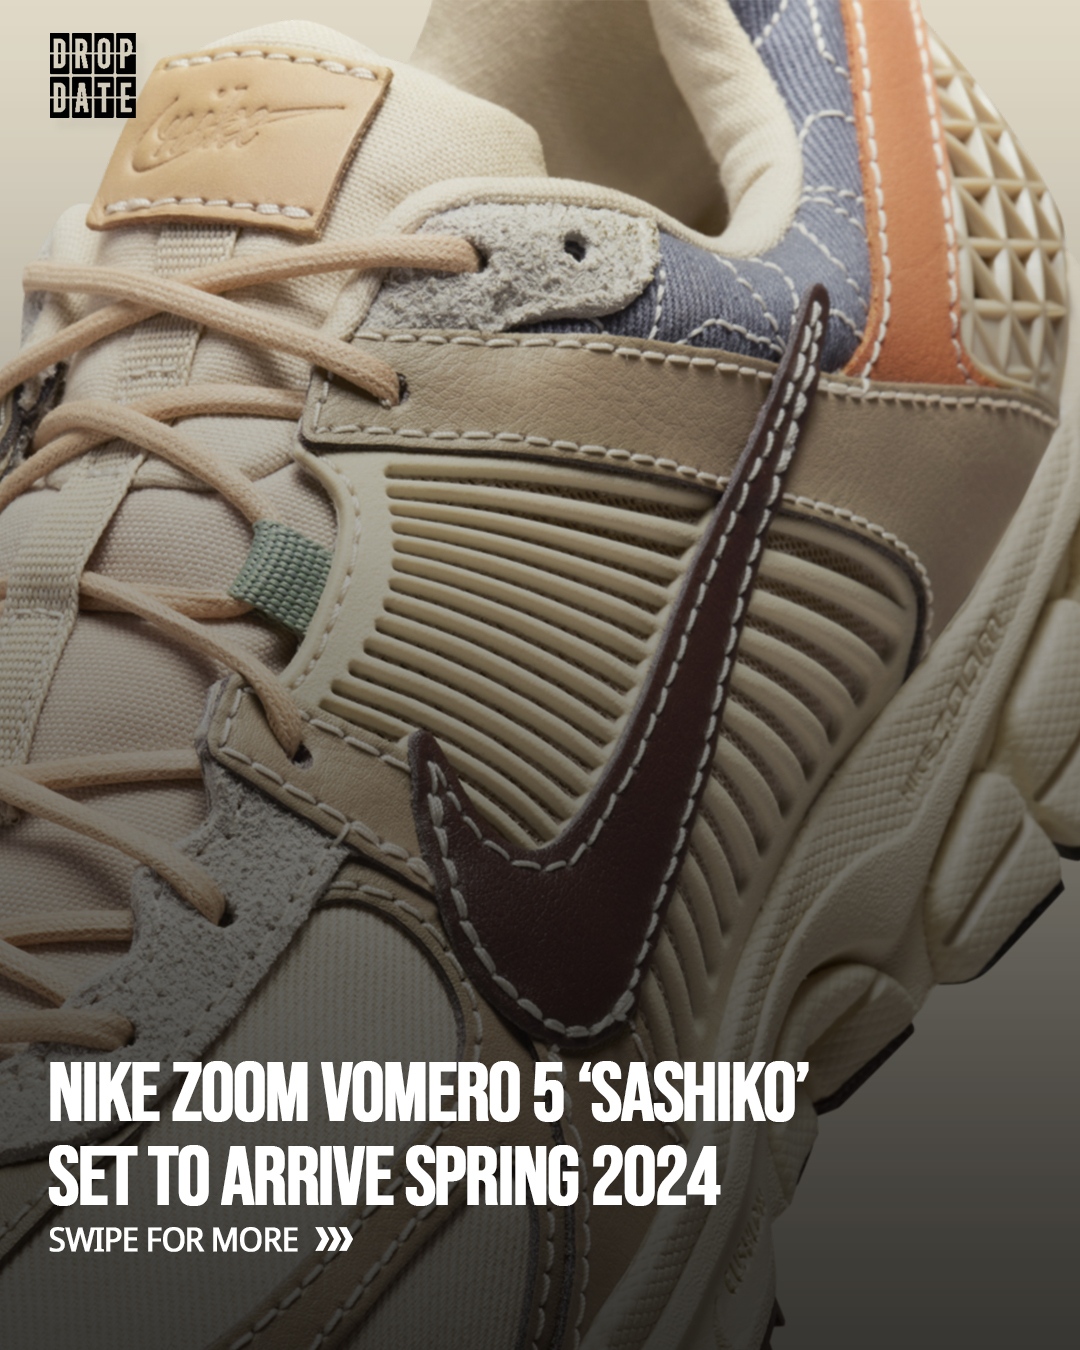 The Drop Date on X: "The Nike Air Zoom Vomero 5 'SASHIKO' is set to arrive  Spring 2024... Read more via link - https://t.co/XGQGh8nycg #nike #vomero  #sashiko #thedropdate https://t.co/M7IY2JMpn2" / X